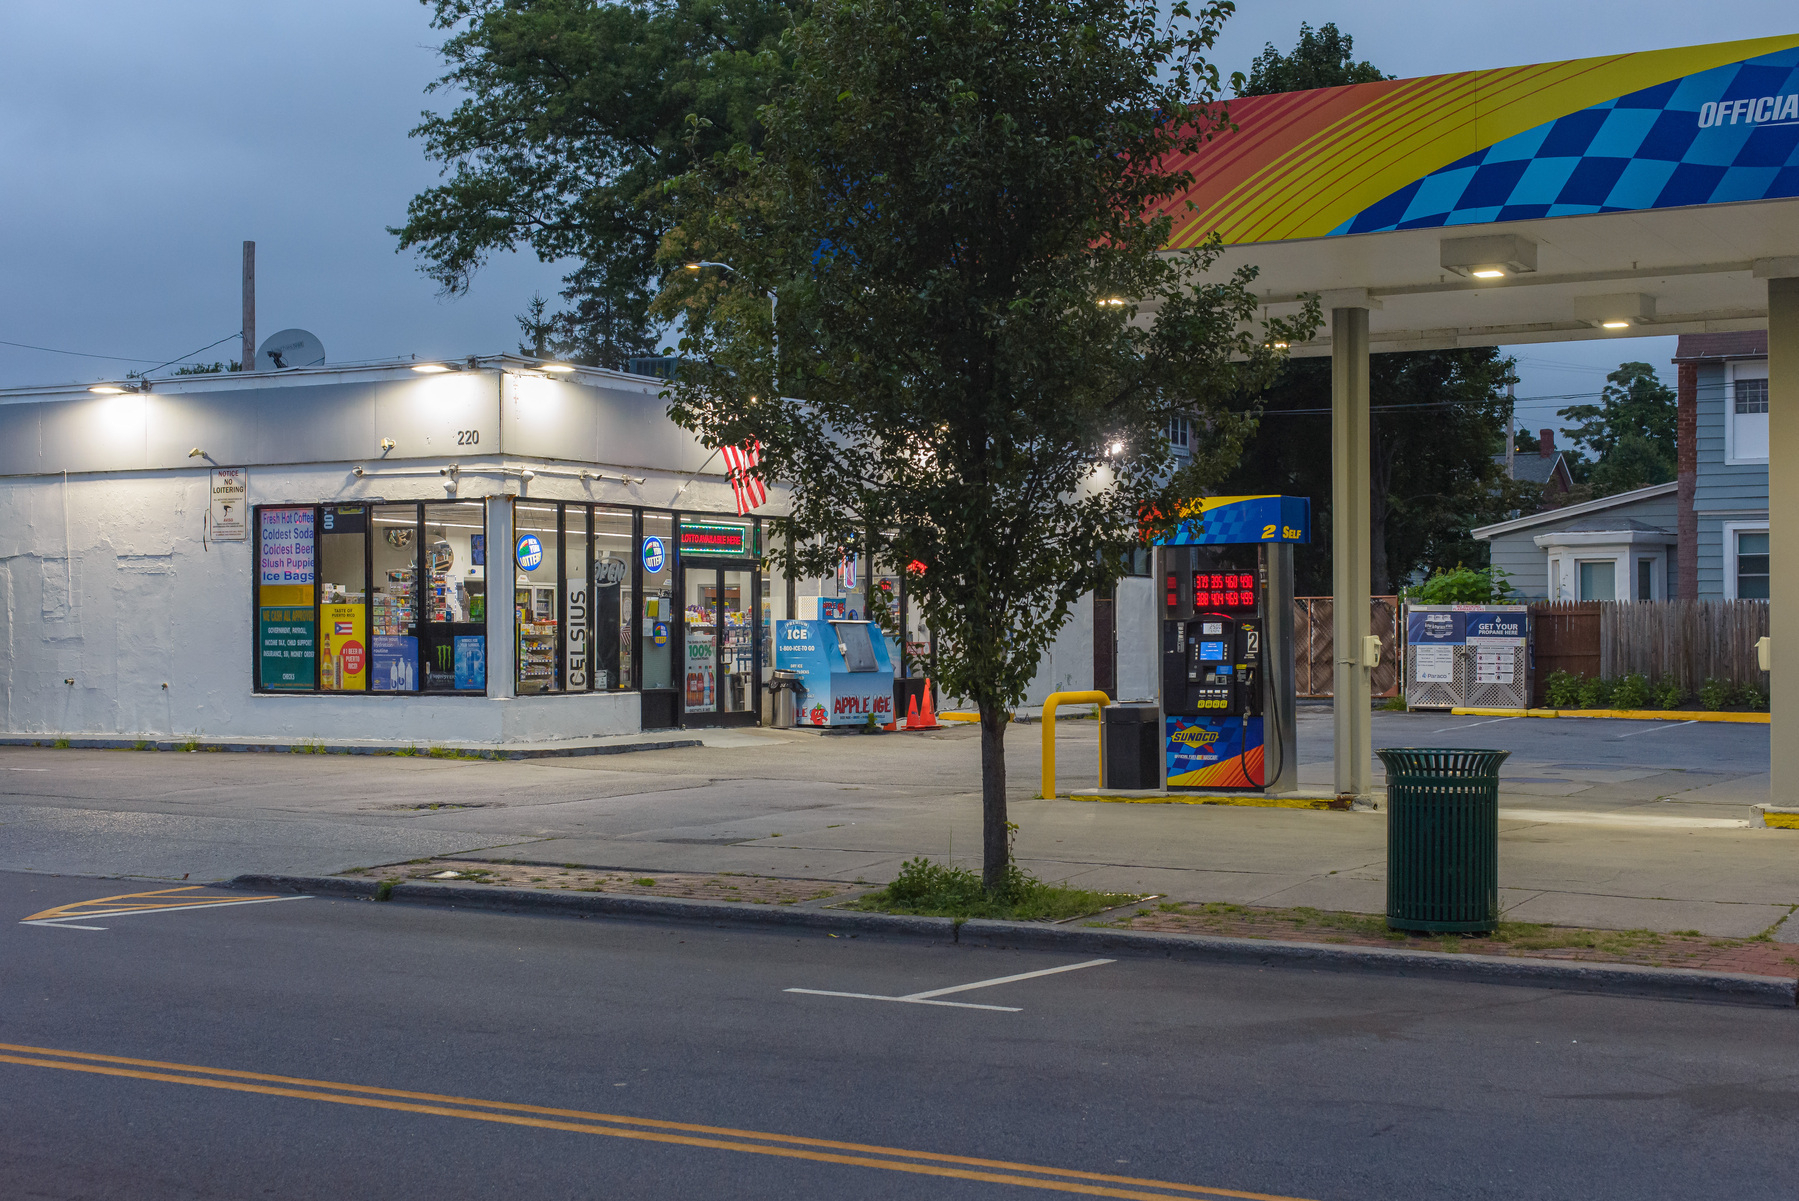 Streetscape. Gas station and convenience store.